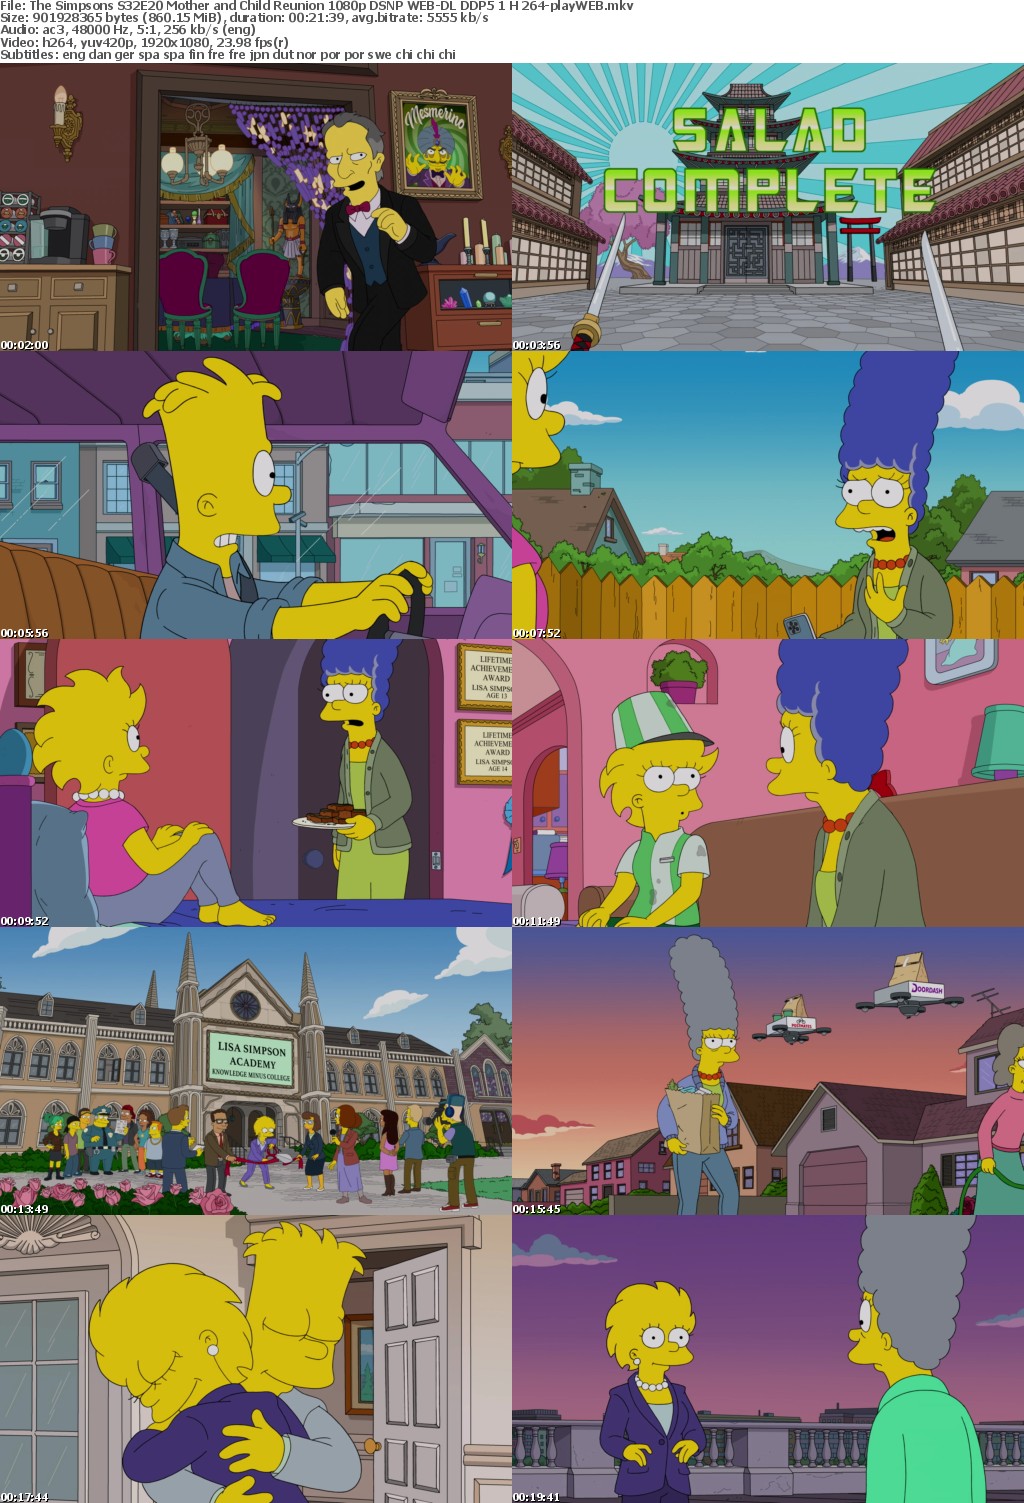 The Simpsons S32E20 Mother and Child Reunion 1080p DSNP WEB-DL DDP5 1 H 264-playWEB